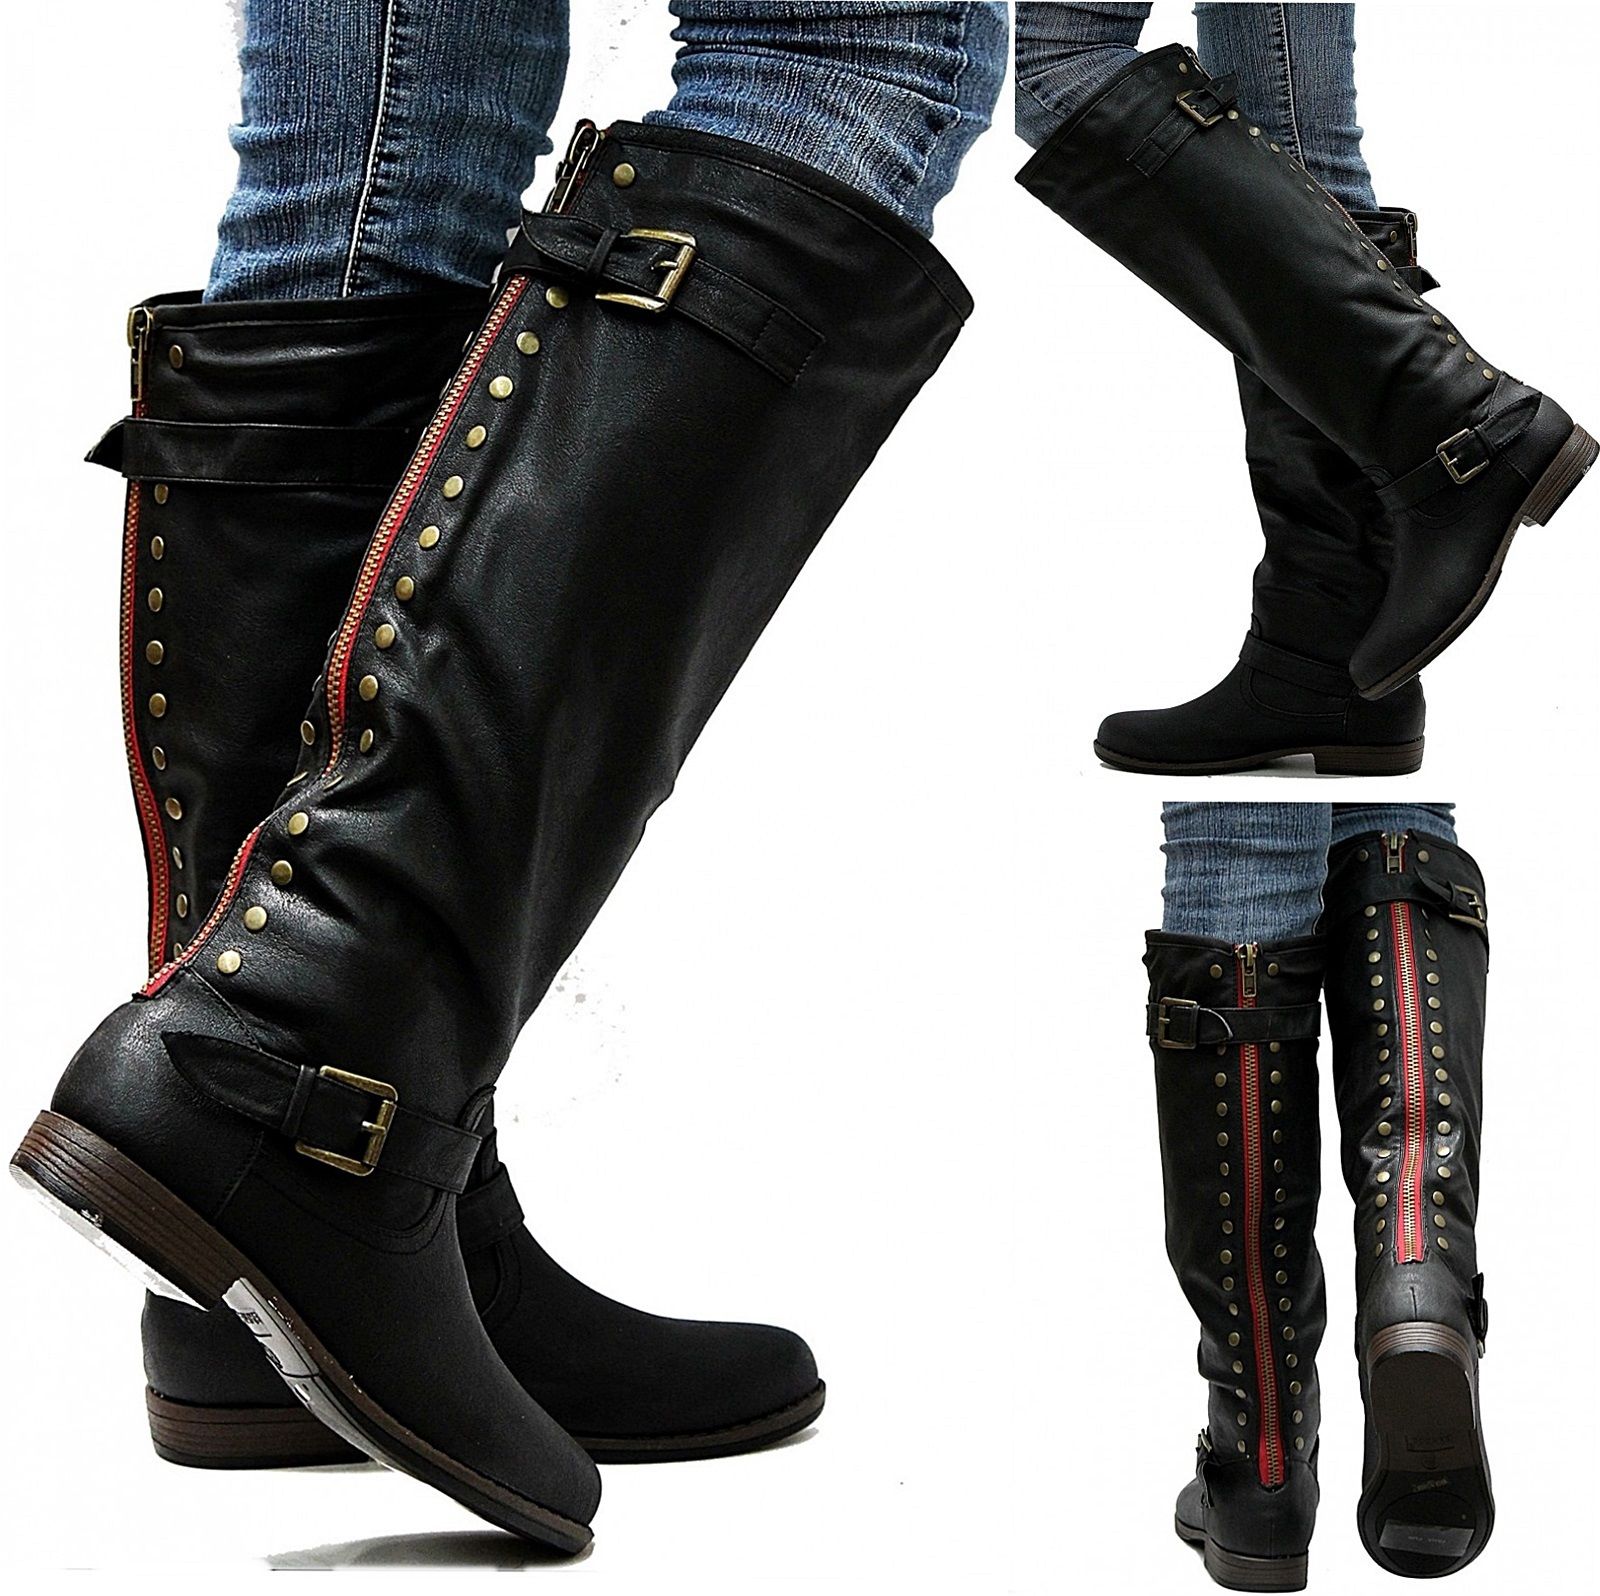 black boots with red zipper